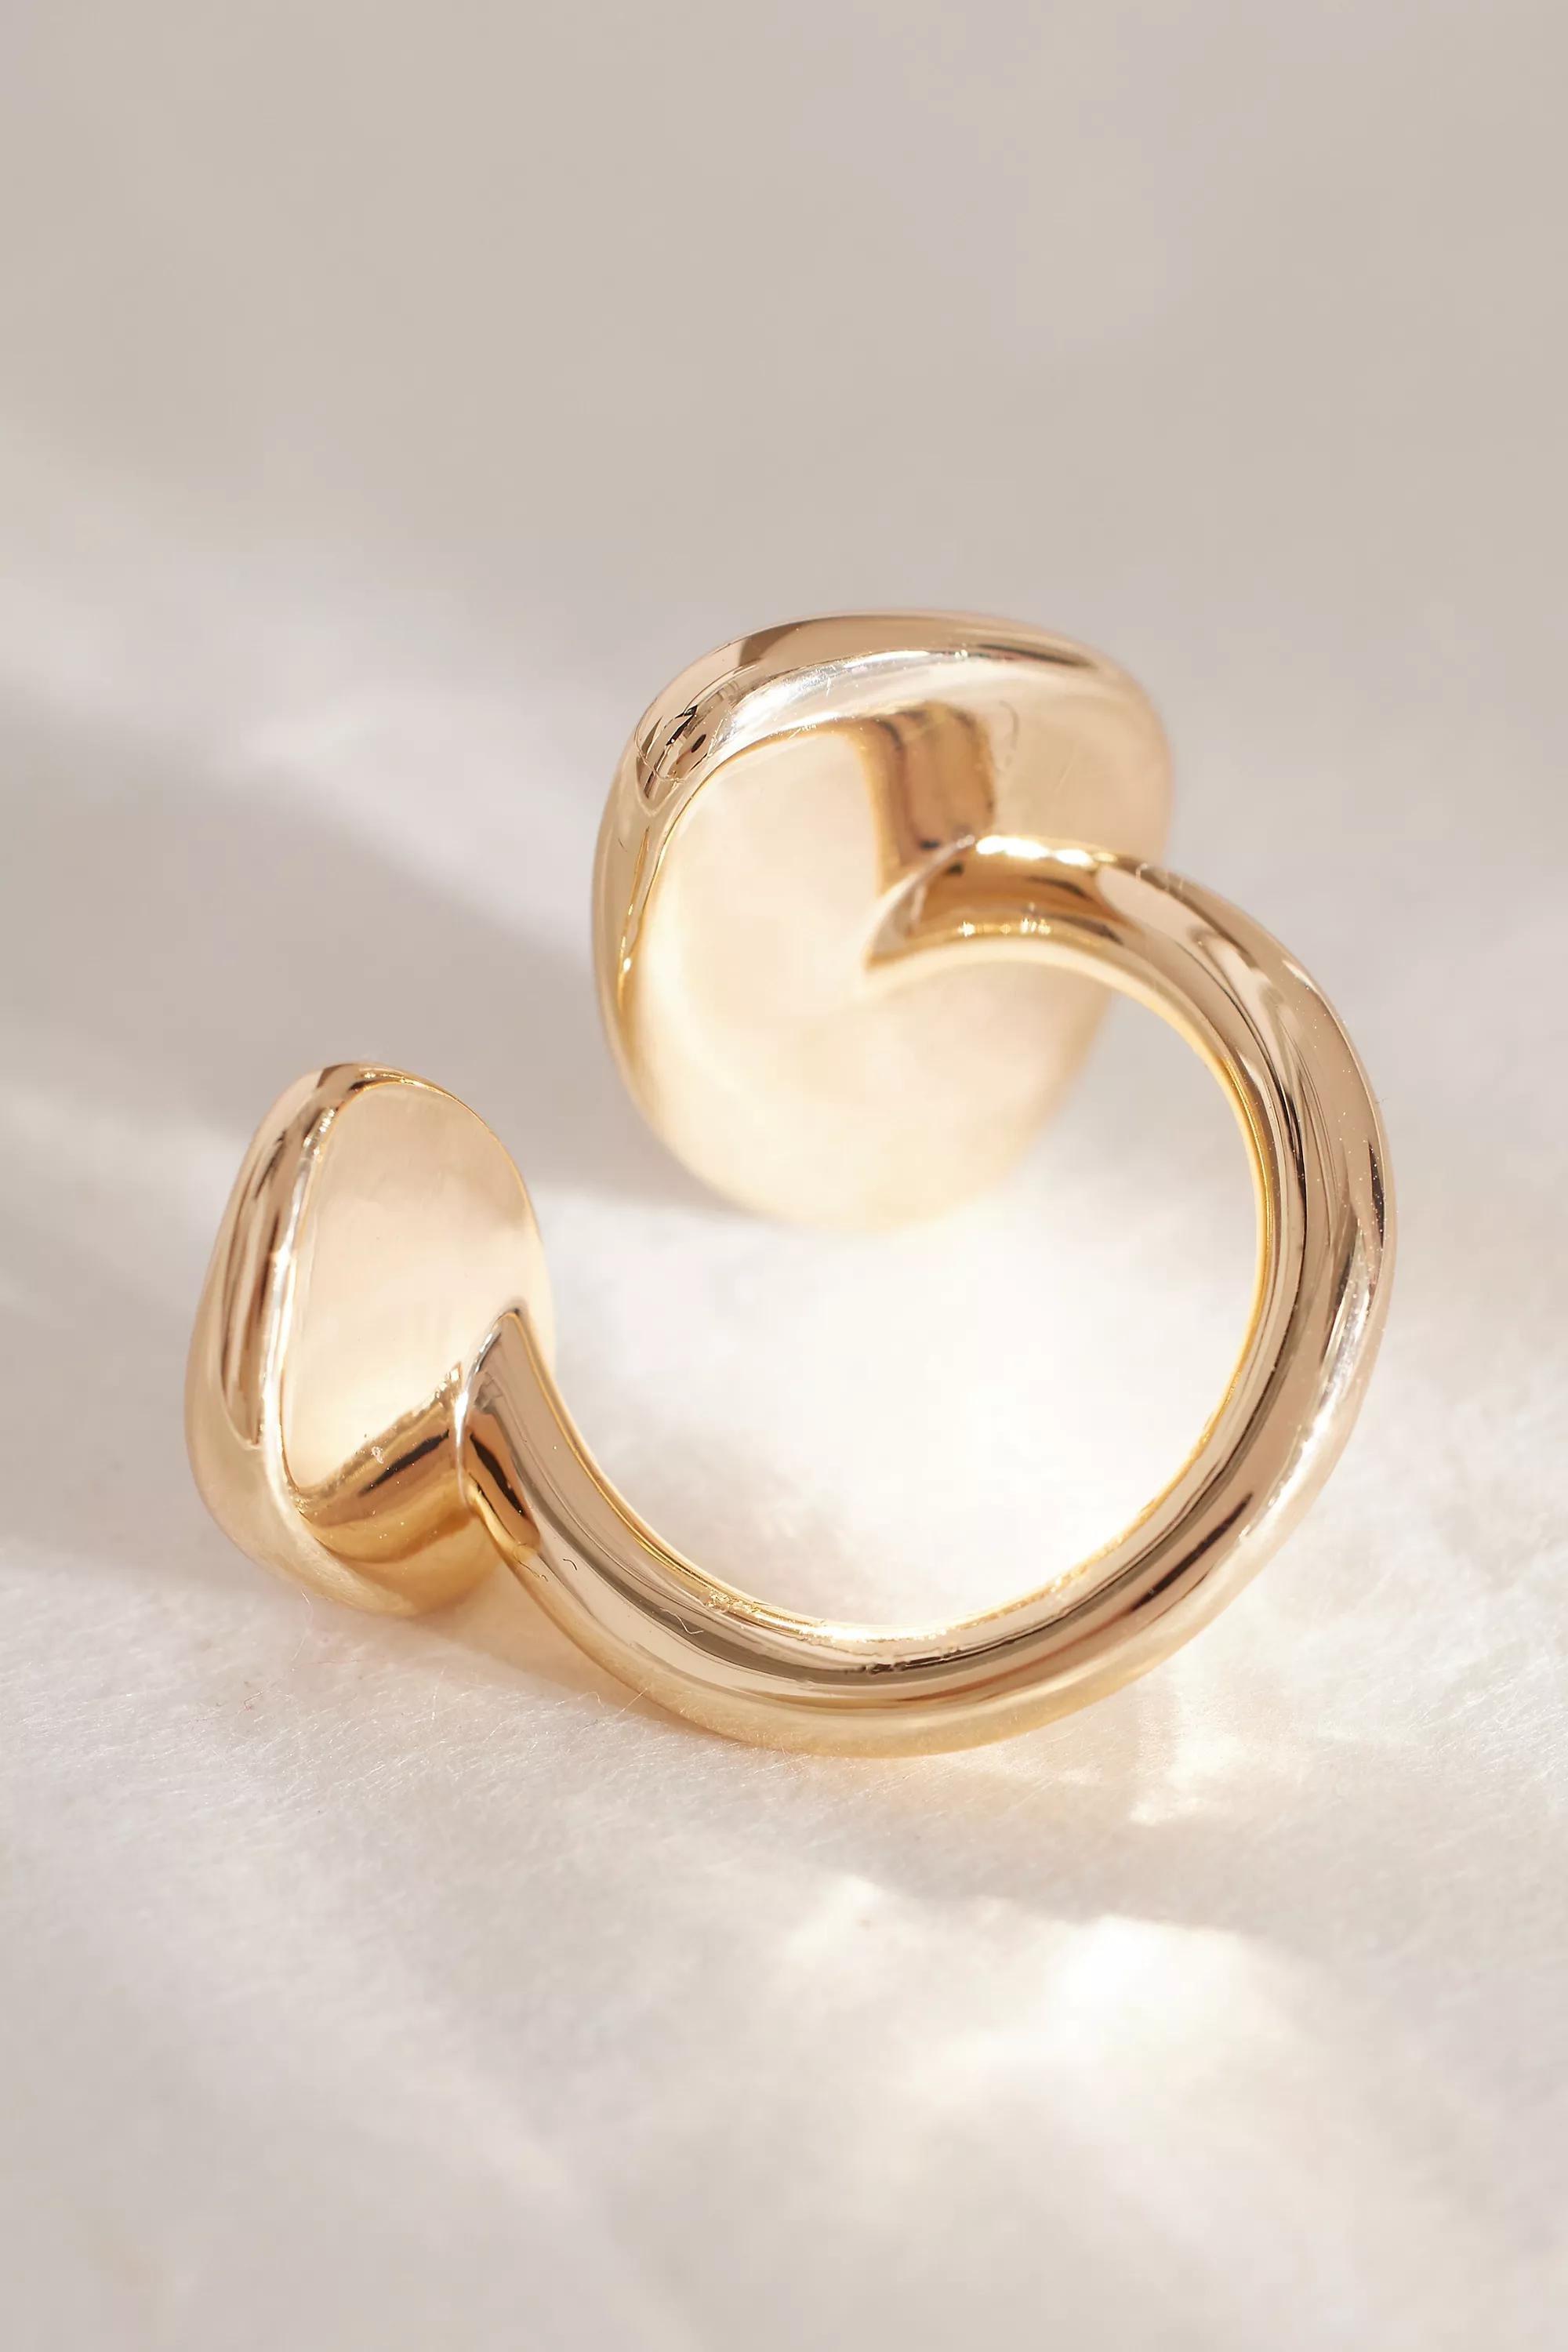 Anthropologie - Oversized Double-Pebble Ring, Gold